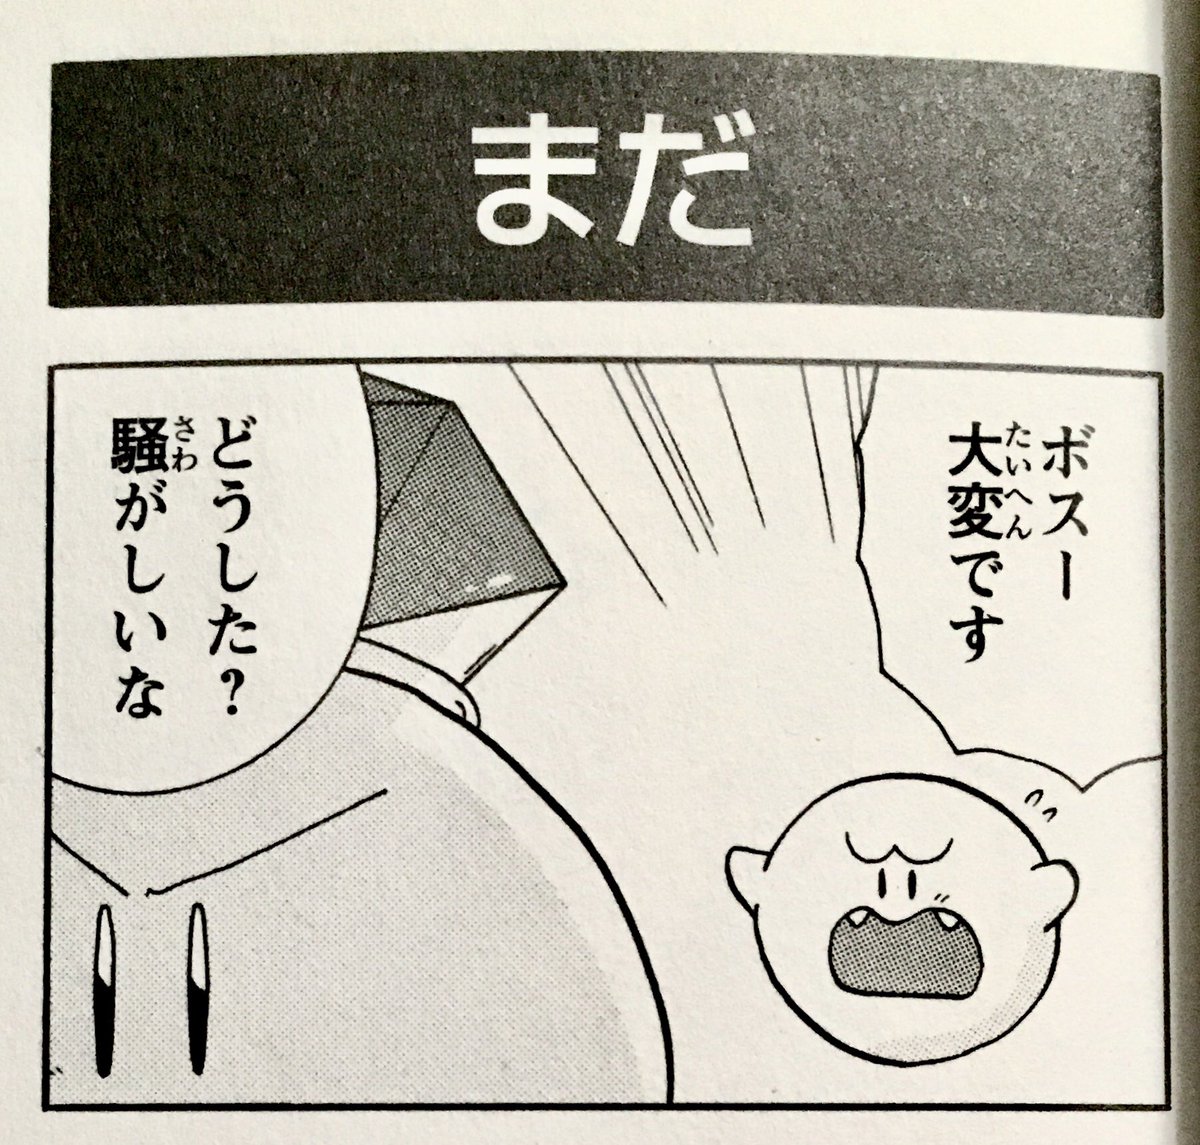 There's another strip later in the manga where King Boo isn't ready for battle cause he's not done making the Bowser Suit 